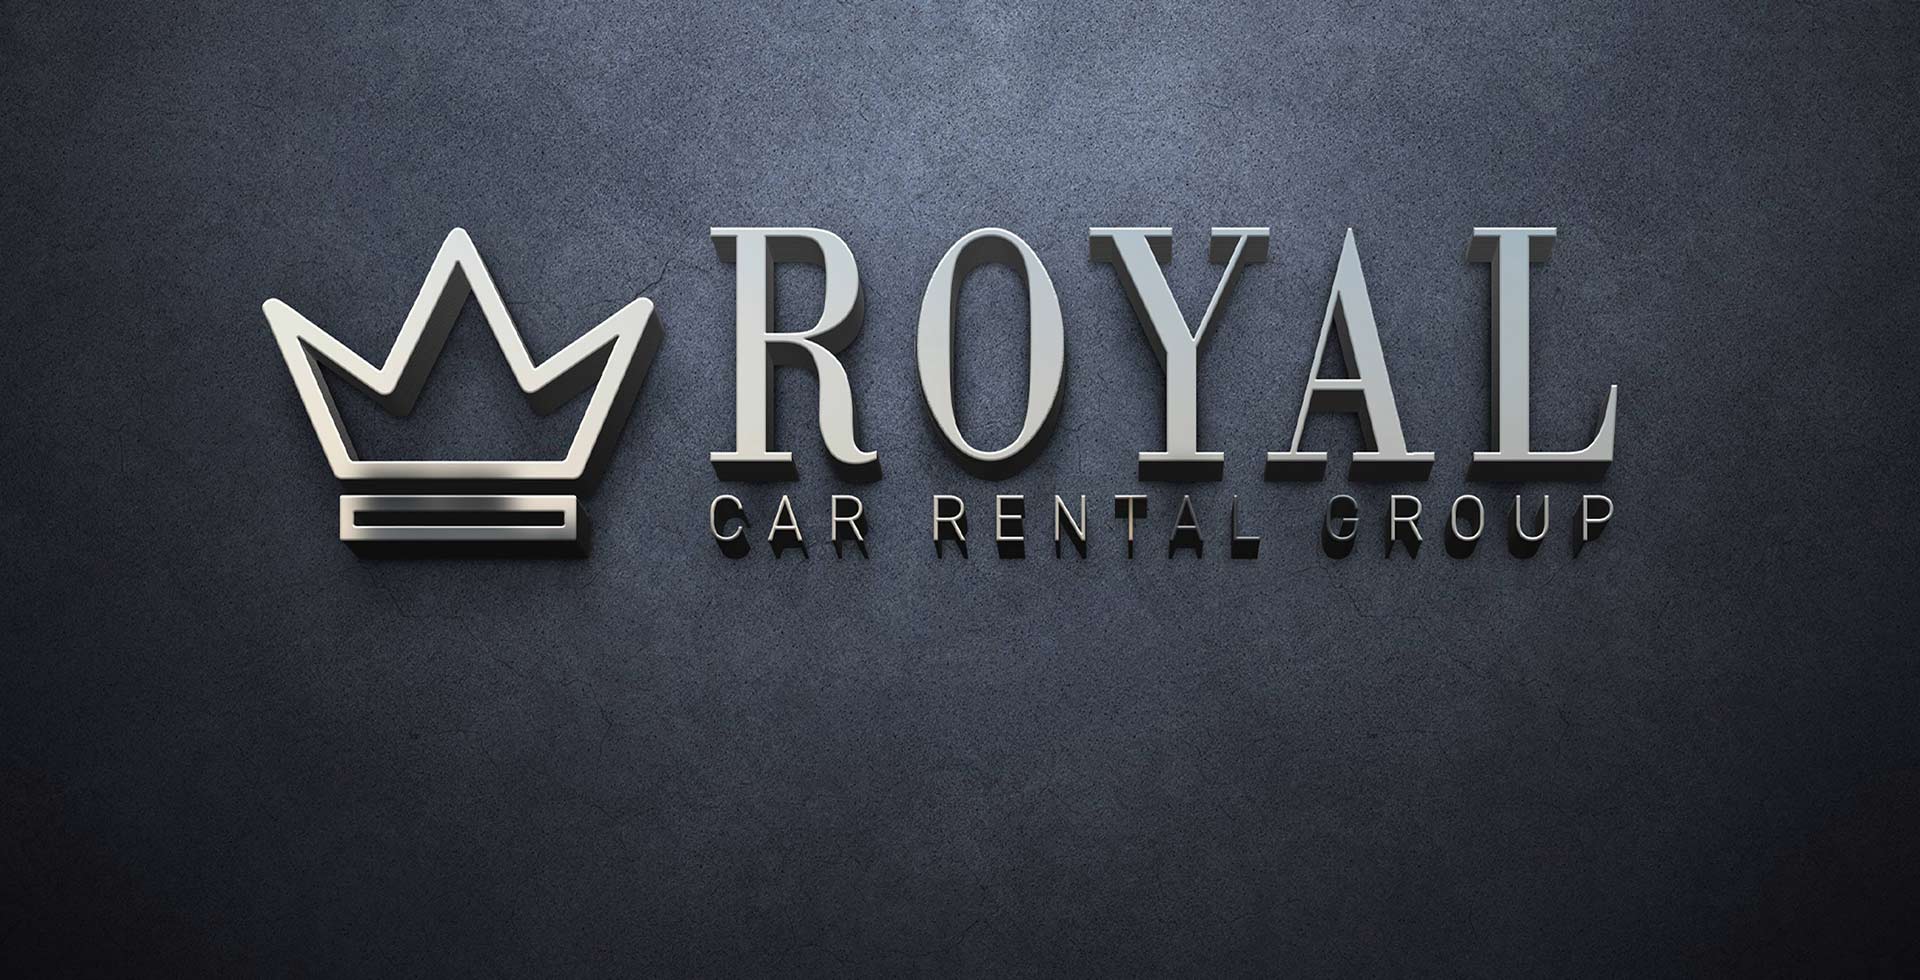 Royal Car Rental Group | Welcome to the Royal Franchising